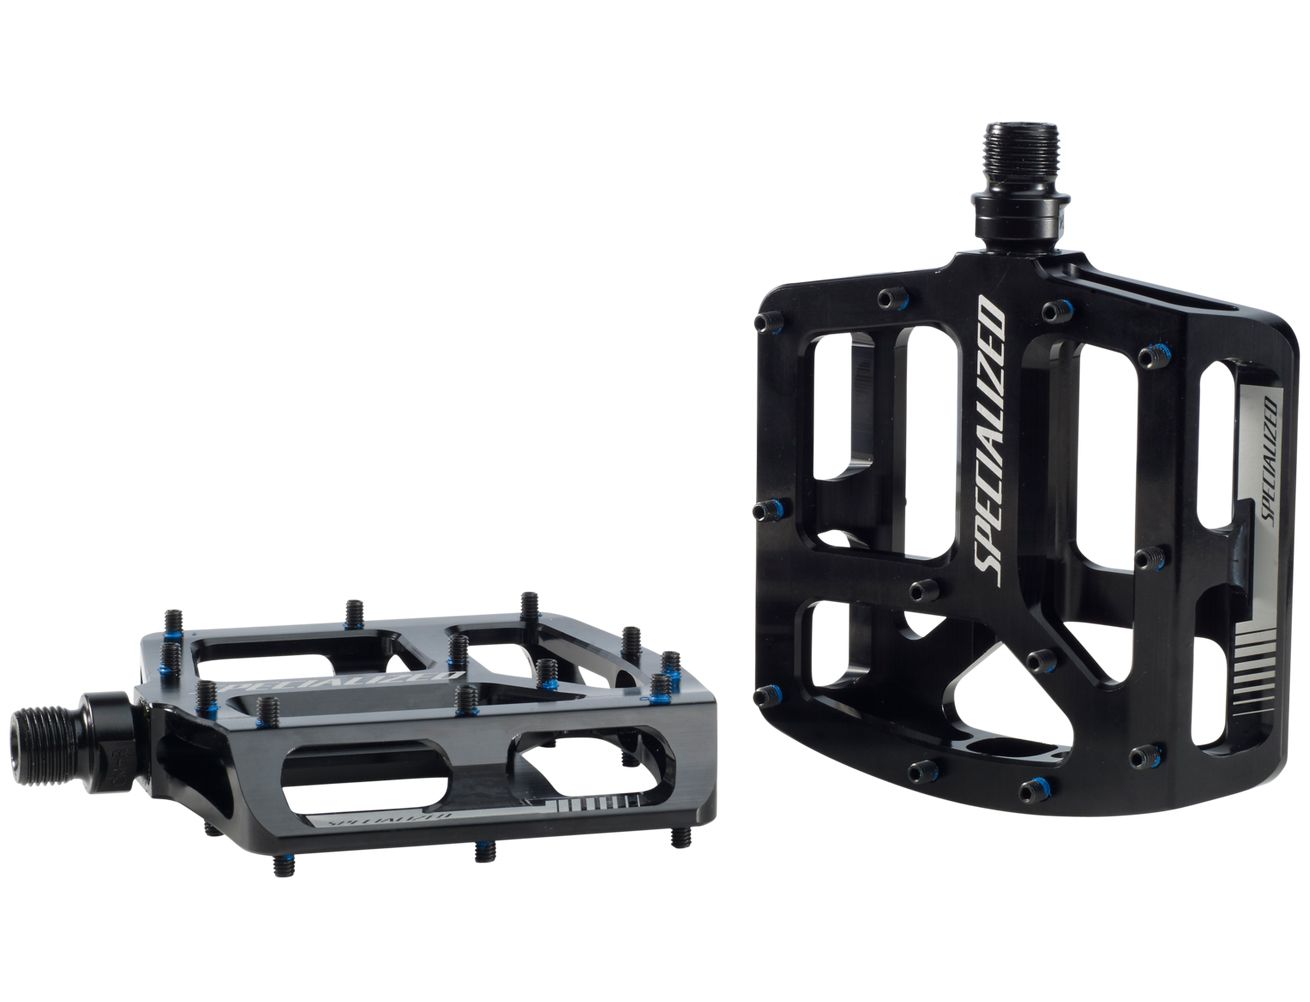 pedals for specialized mountain bike